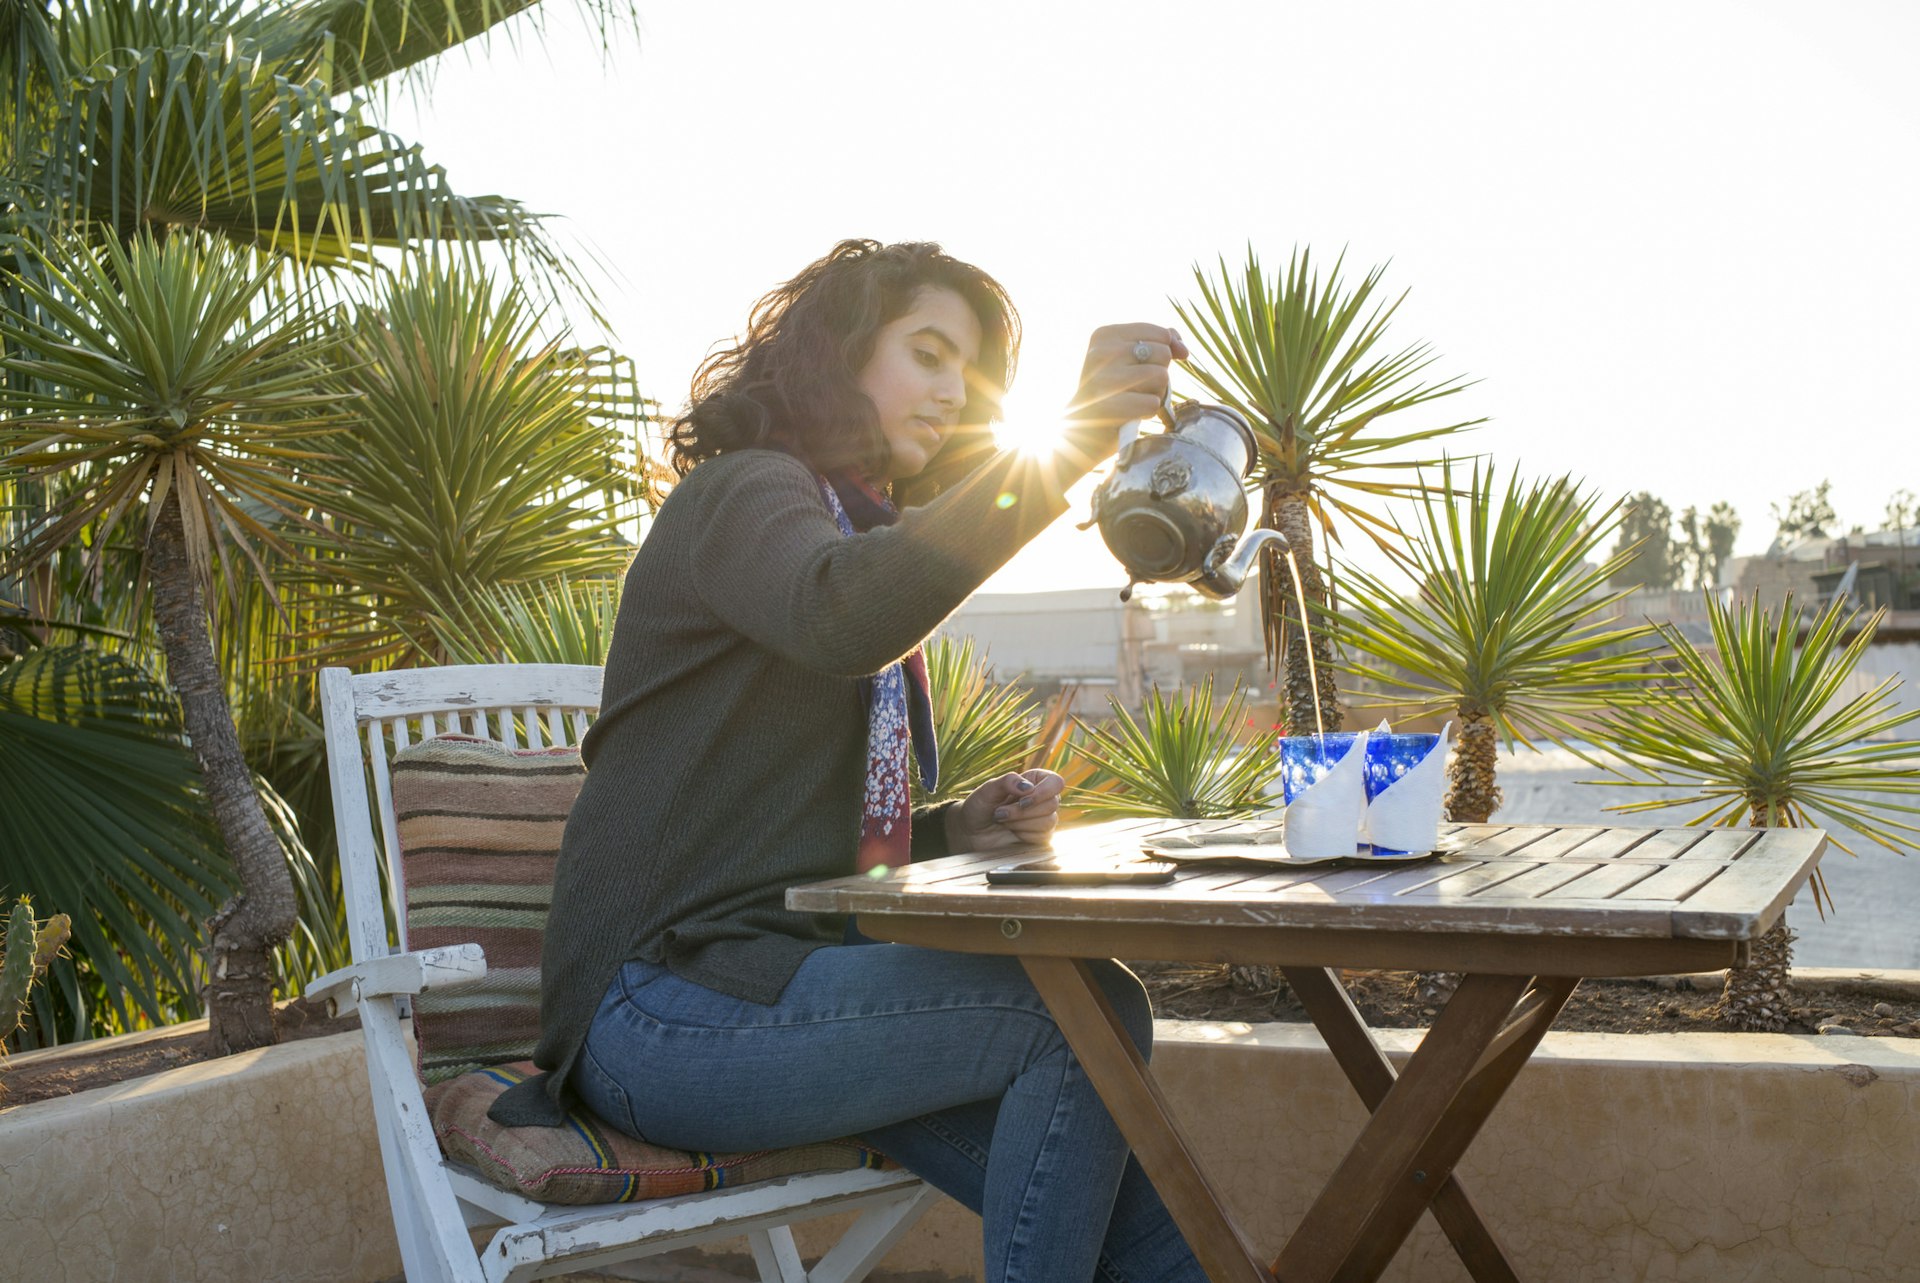 Woman pouring tea into cups on a patio in Morocco.